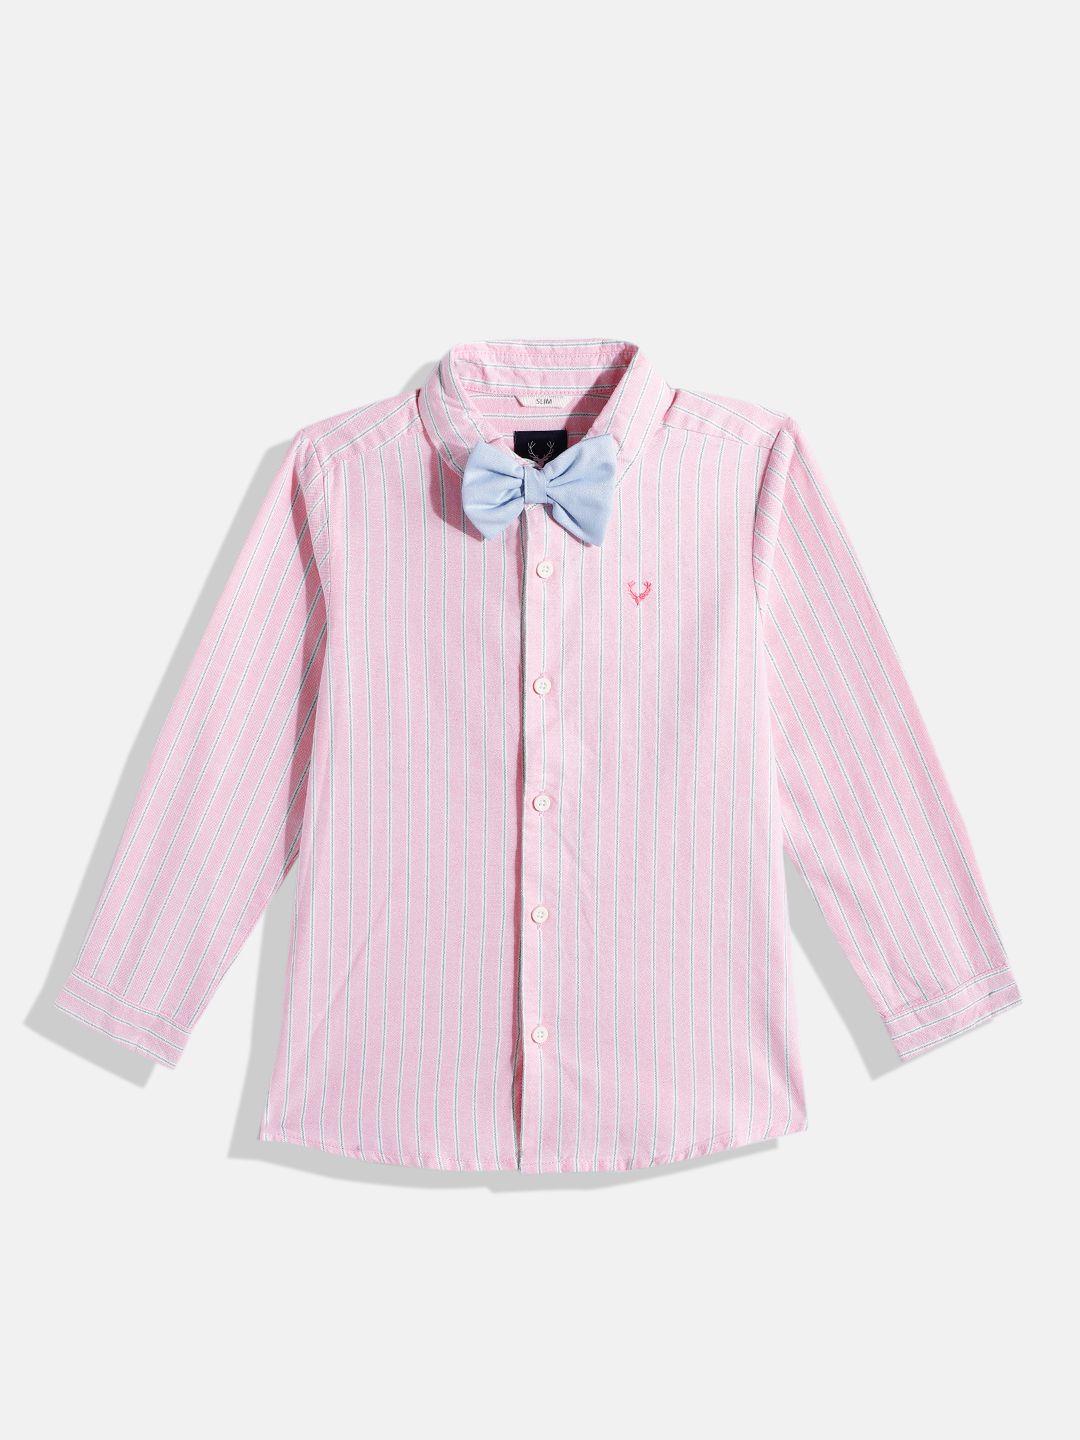 allen solly junior boys striped pure cotton casual shirt with bow tie